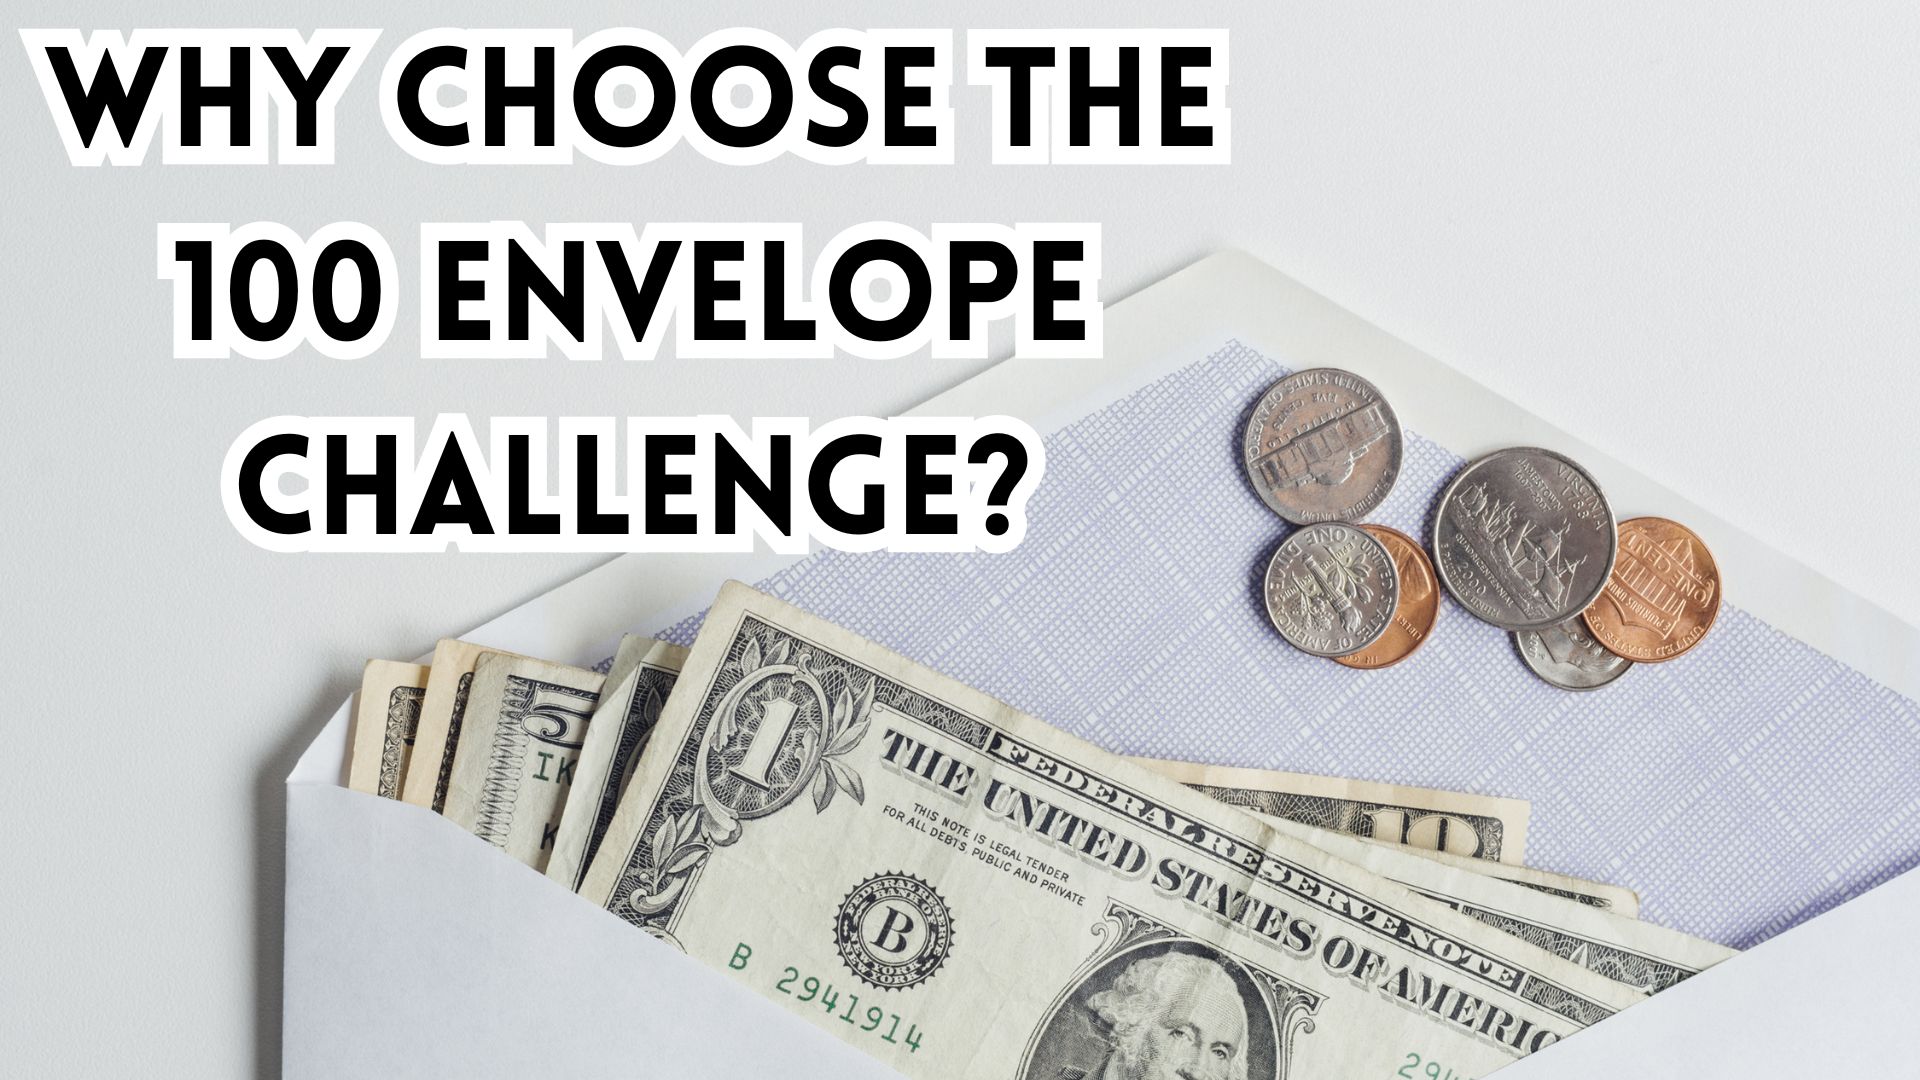 Why Choose the 100 Envelope Challenge?